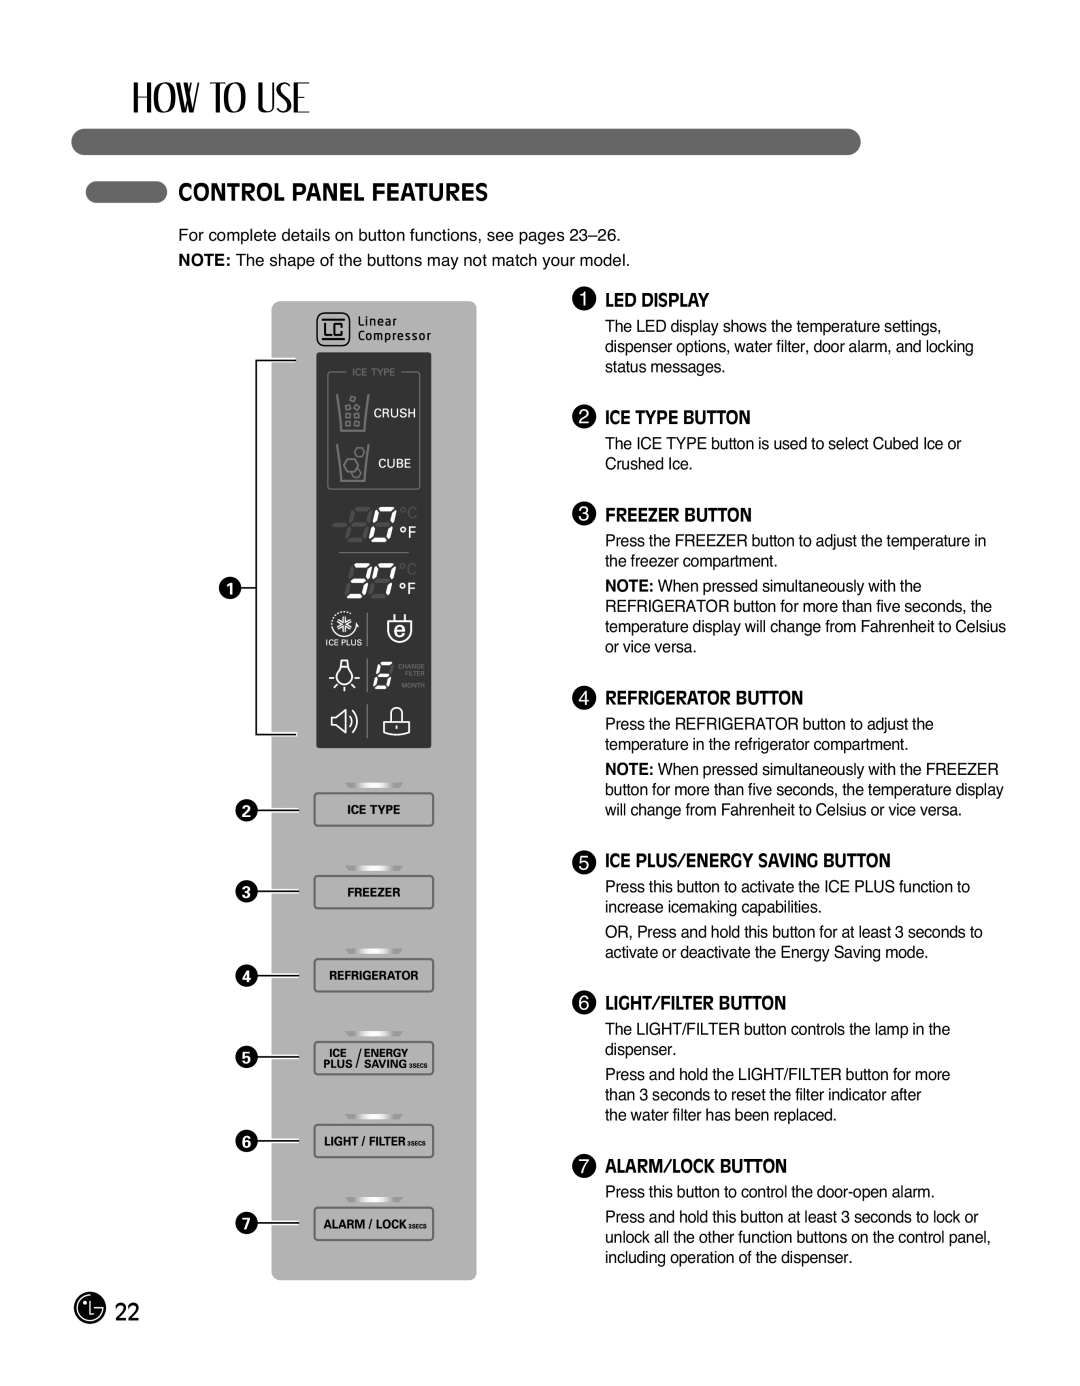 LG Electronics LMX25988ST Control Panel Features, Led Display, Ice Type Button, Freezer Button, Refrigerator Button 